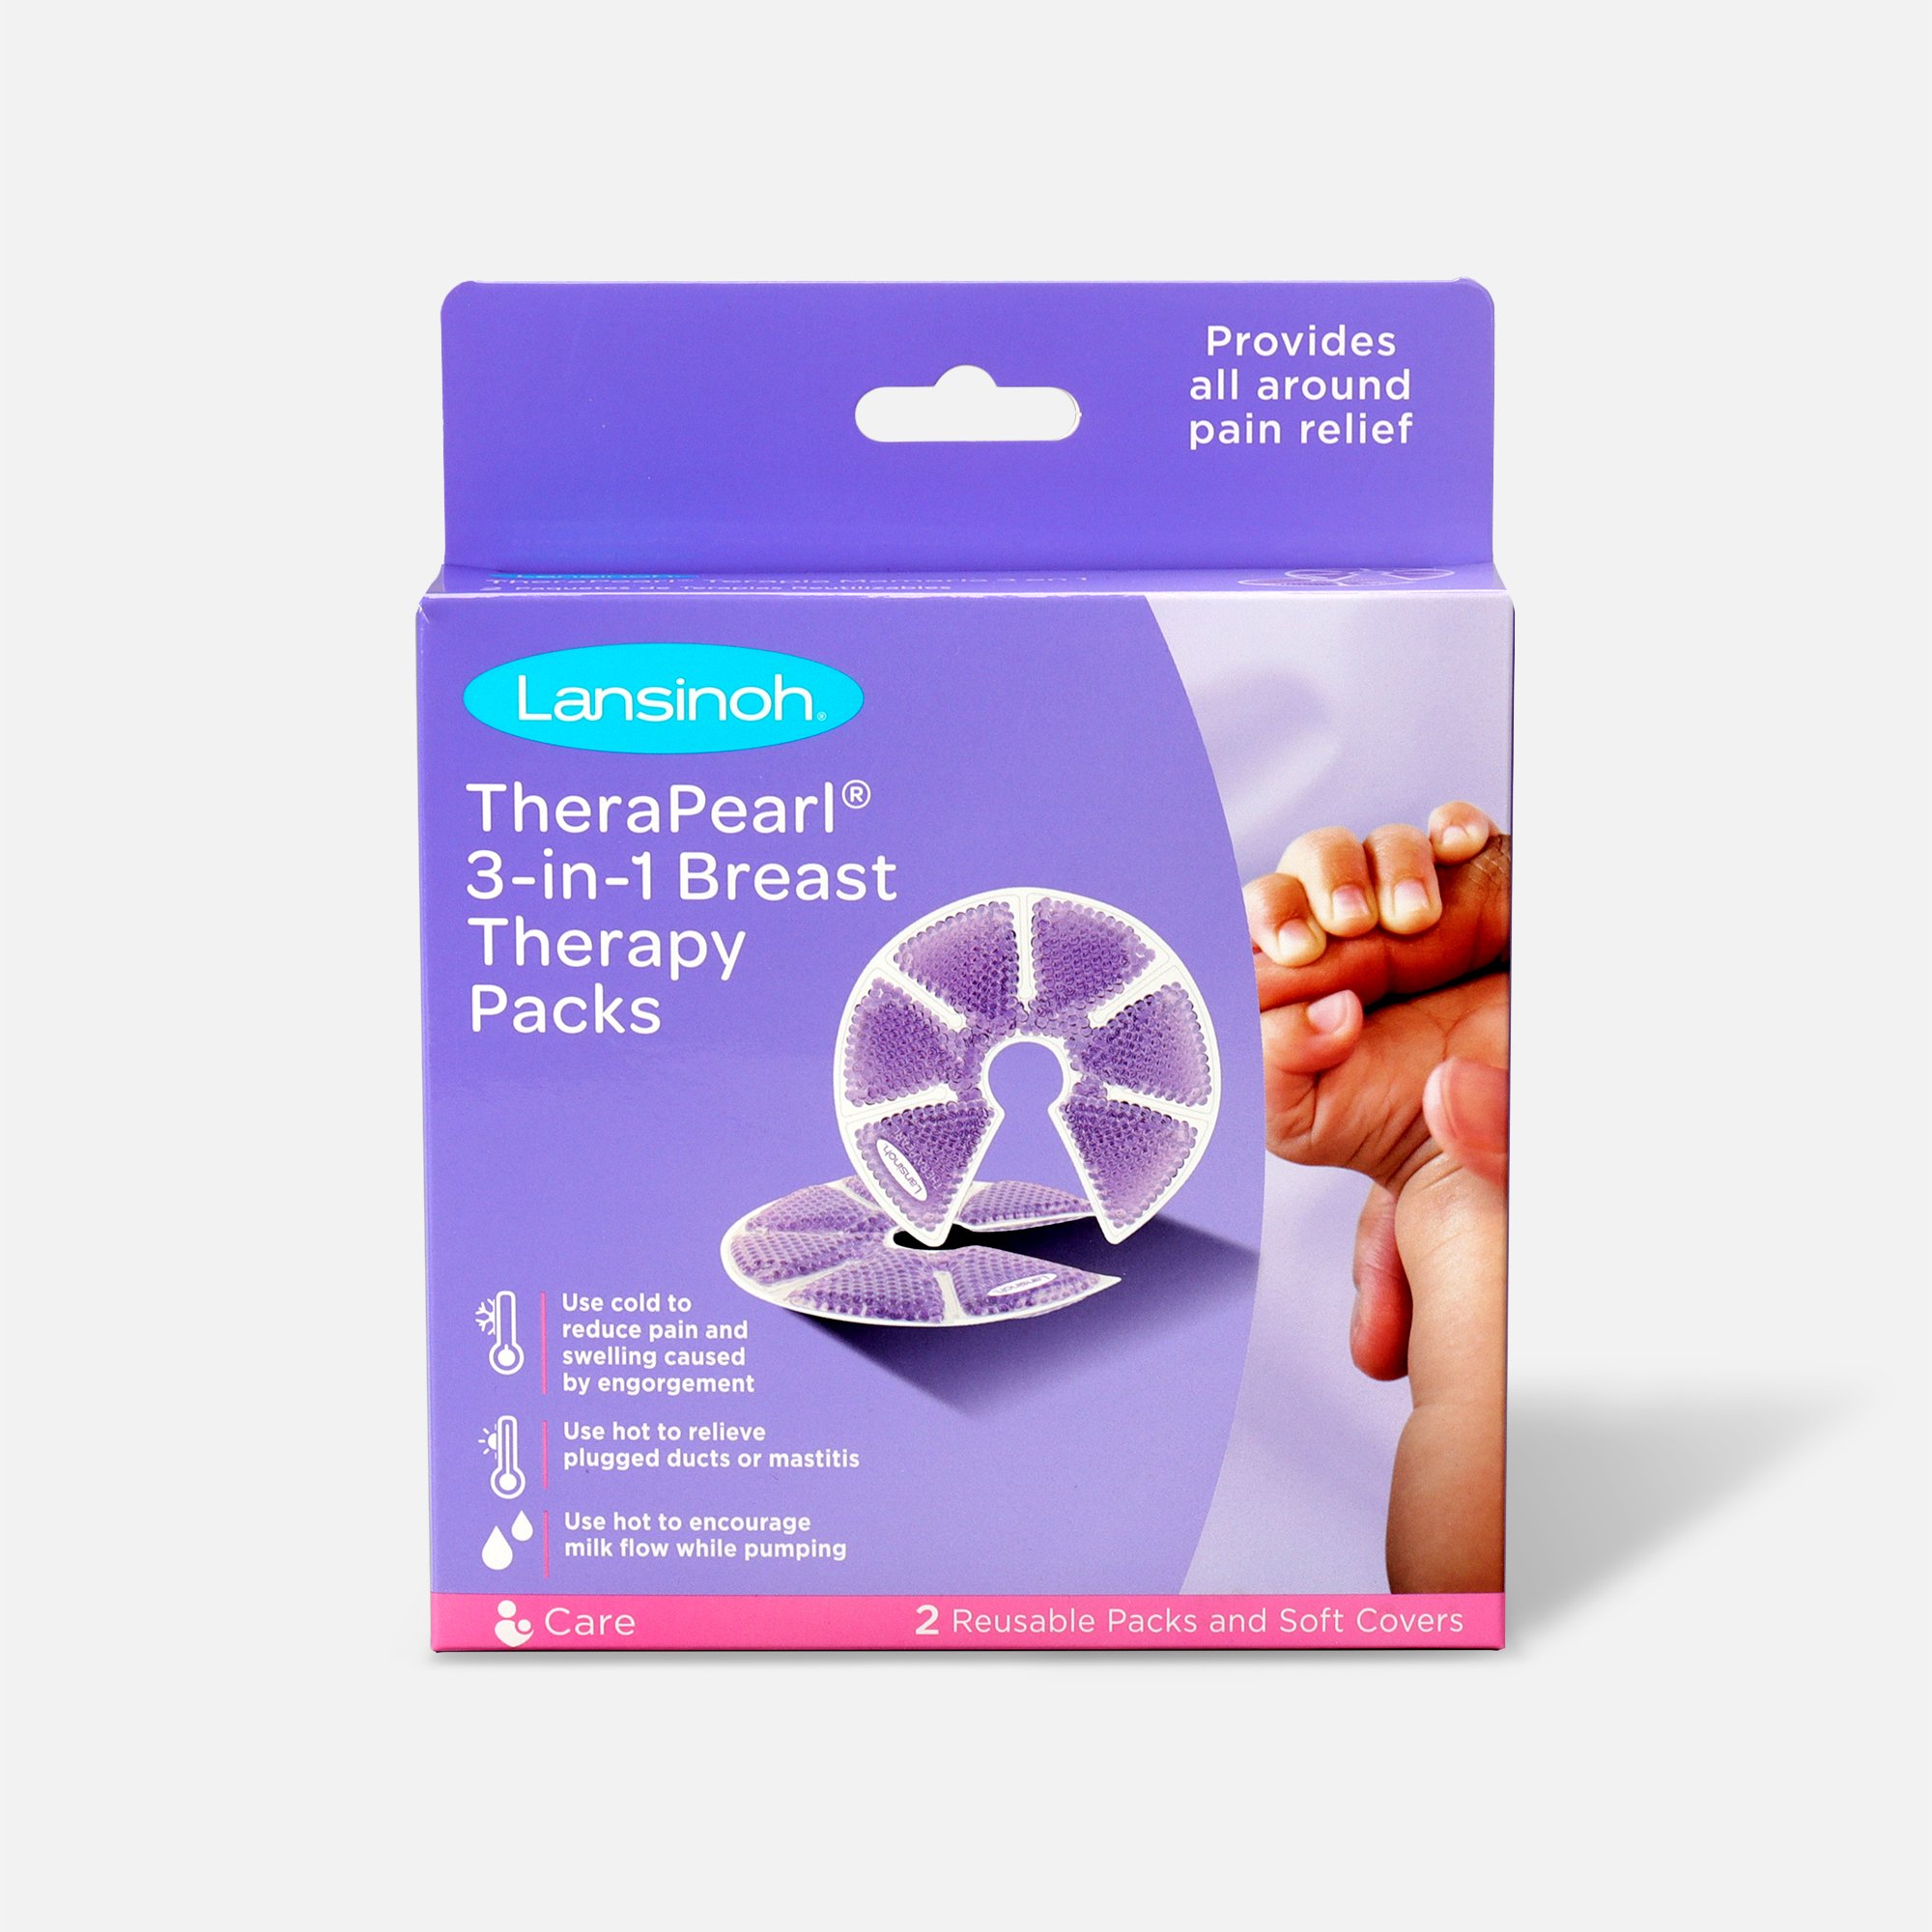 https://fsastore.com/on/demandware.static/-/Sites-hec-master/default/dw18e172de/images/large/lansinoh-therapearl-3-in-1-hot-or-cold-breast-therapy-25244-1.jpg